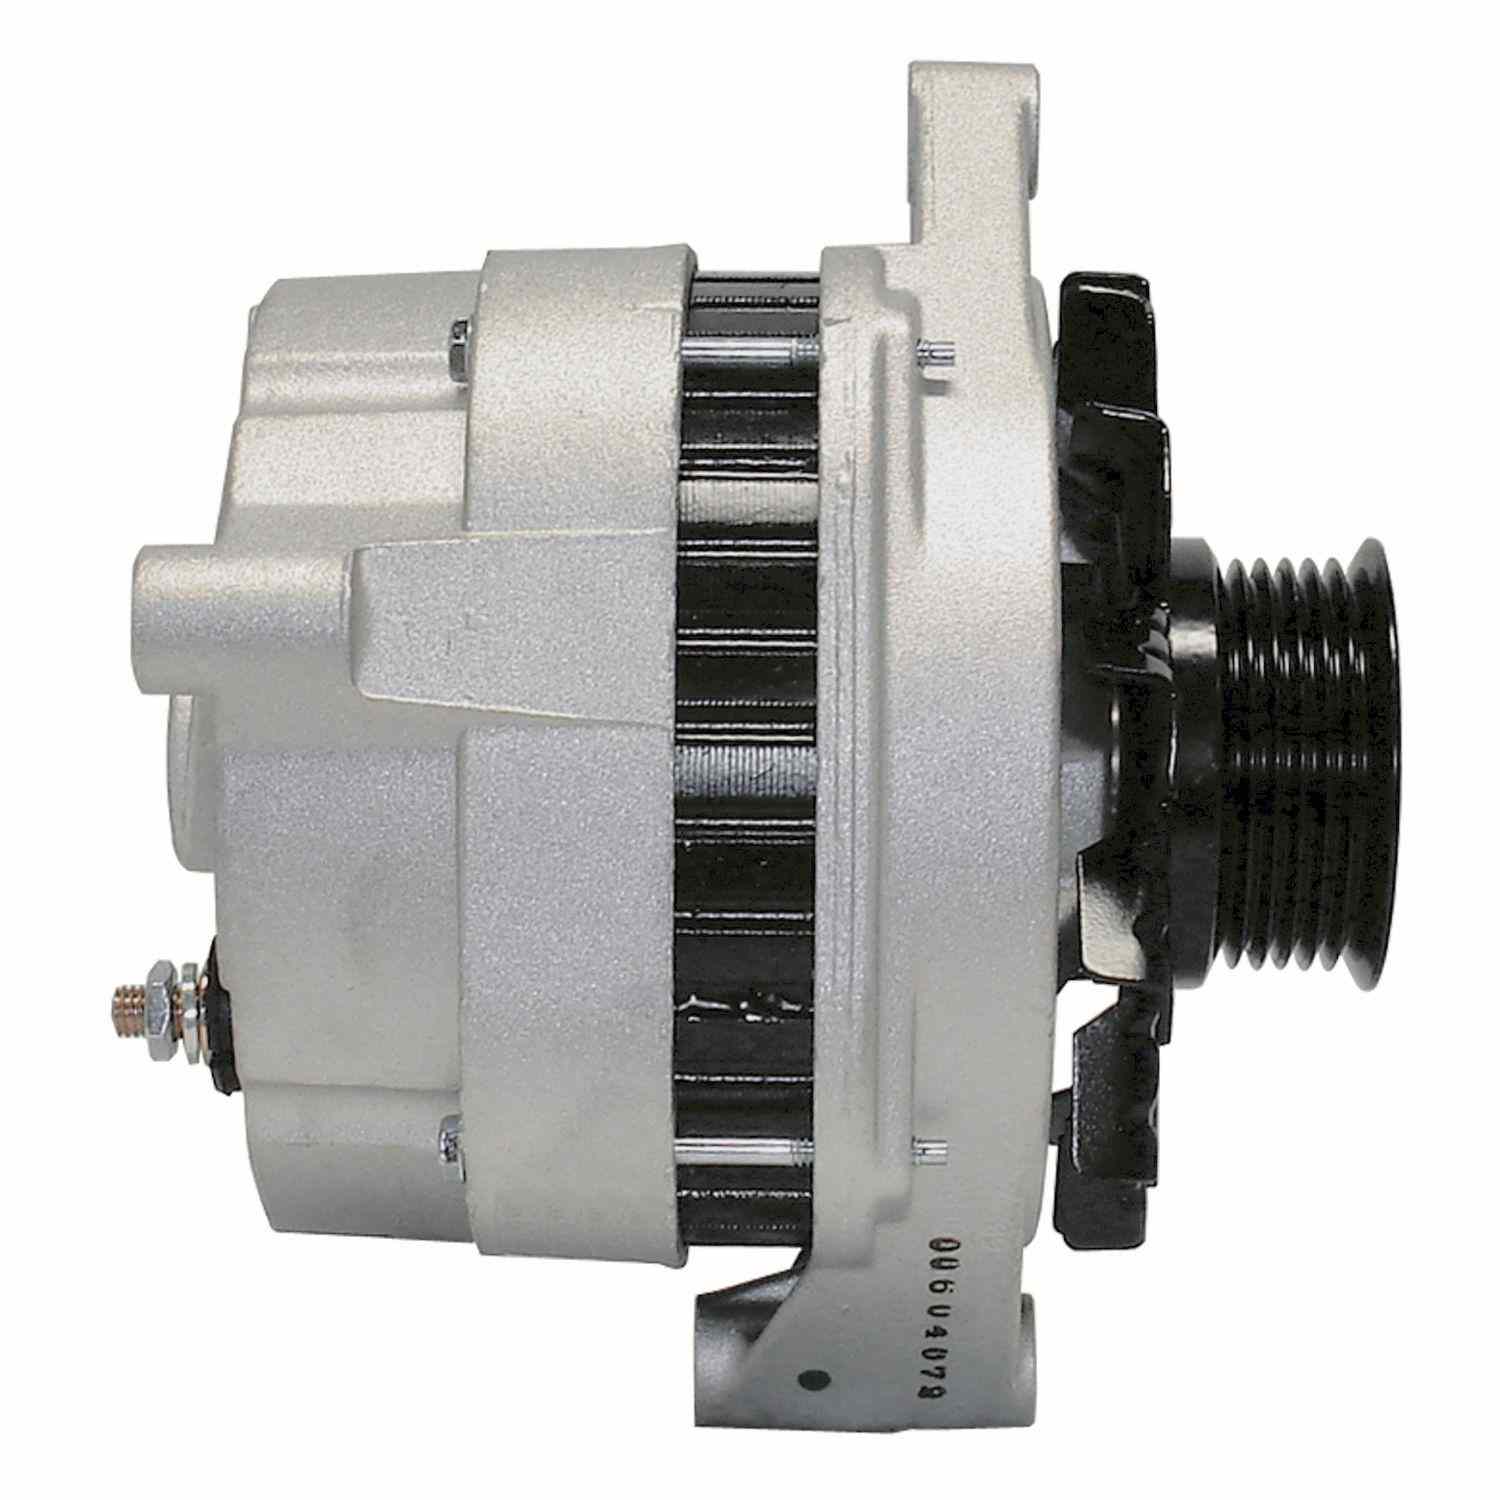 ACDELCO GOLD/PROFESSIONAL - Reman Alternator - DCC 334-2457A